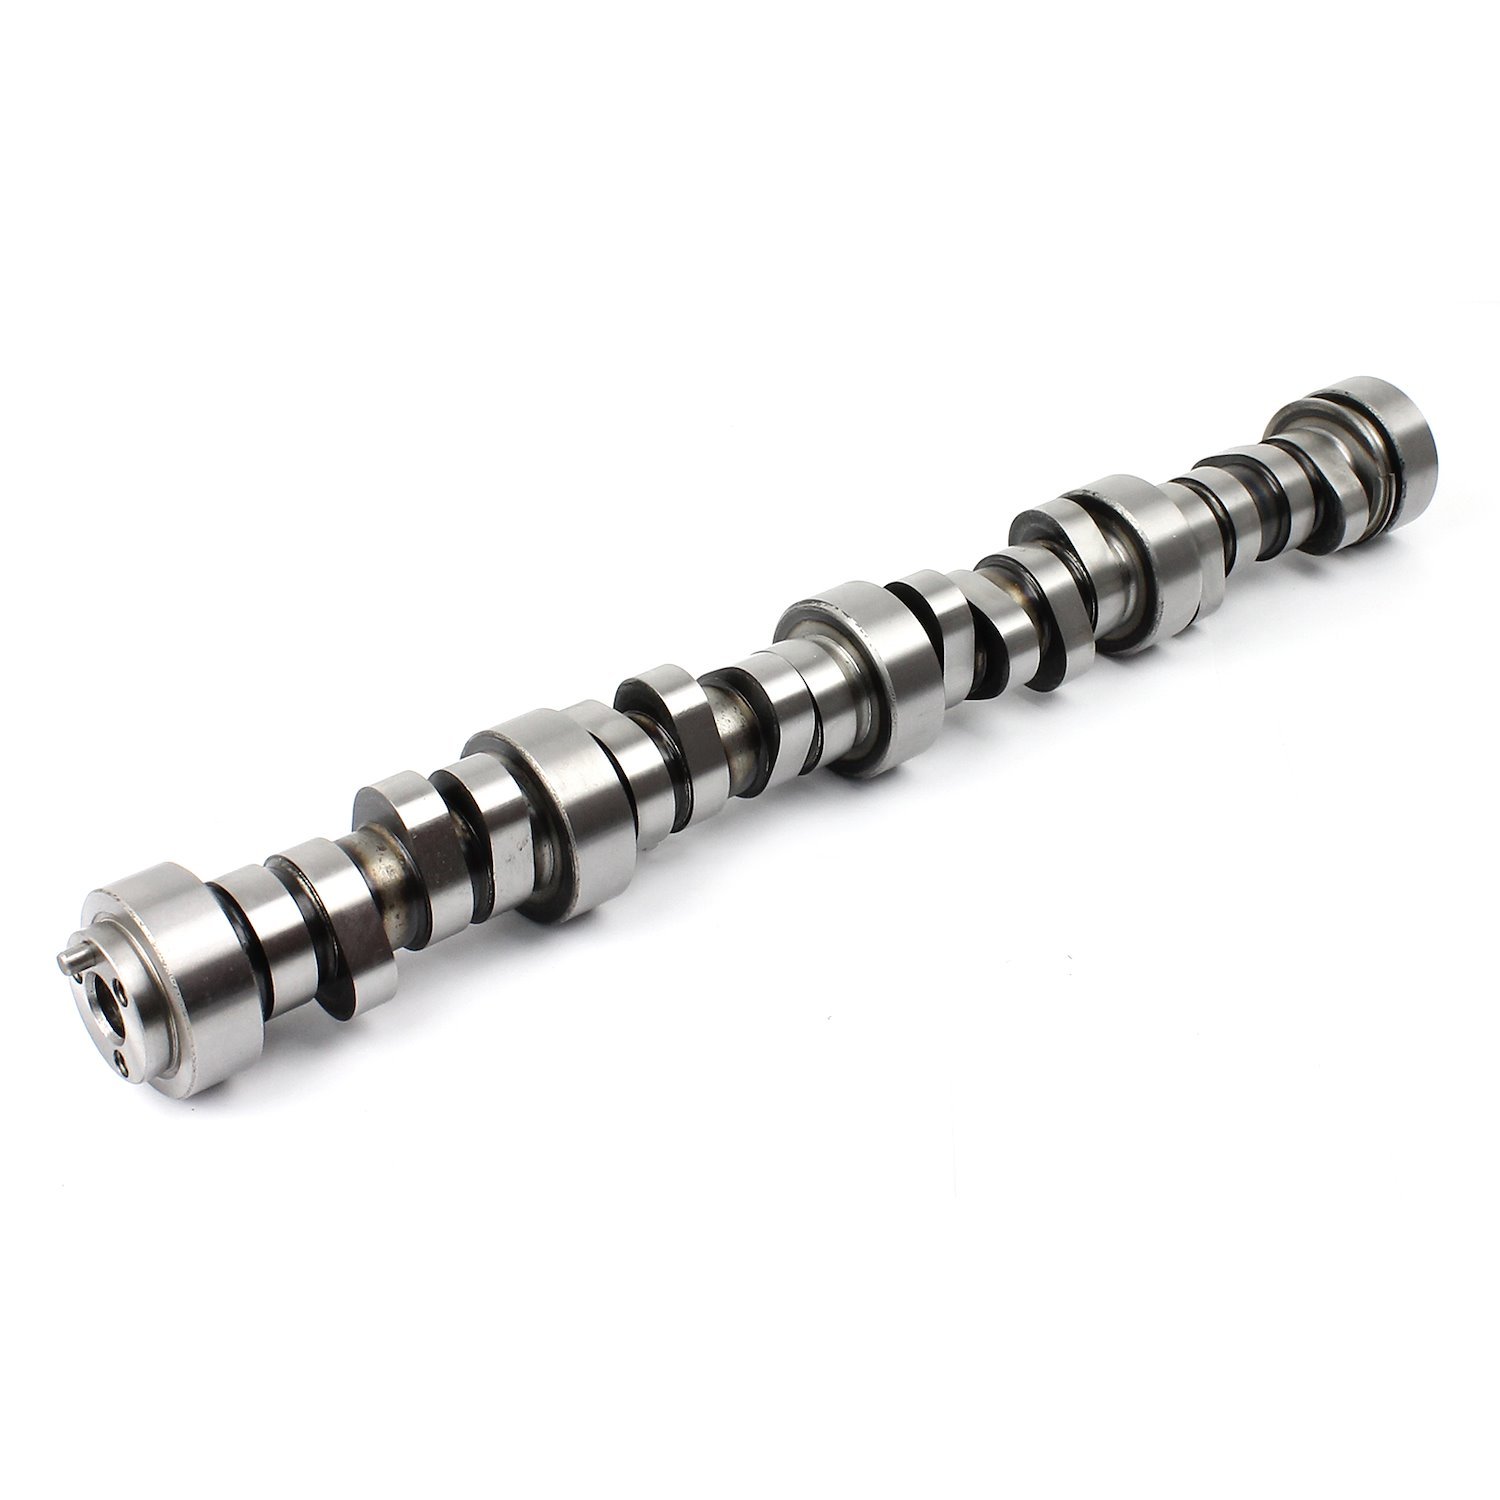 Chevy LS1 LS2 LS6 Hydraulic Roller Tappet Camshaft .578/.587 Lift